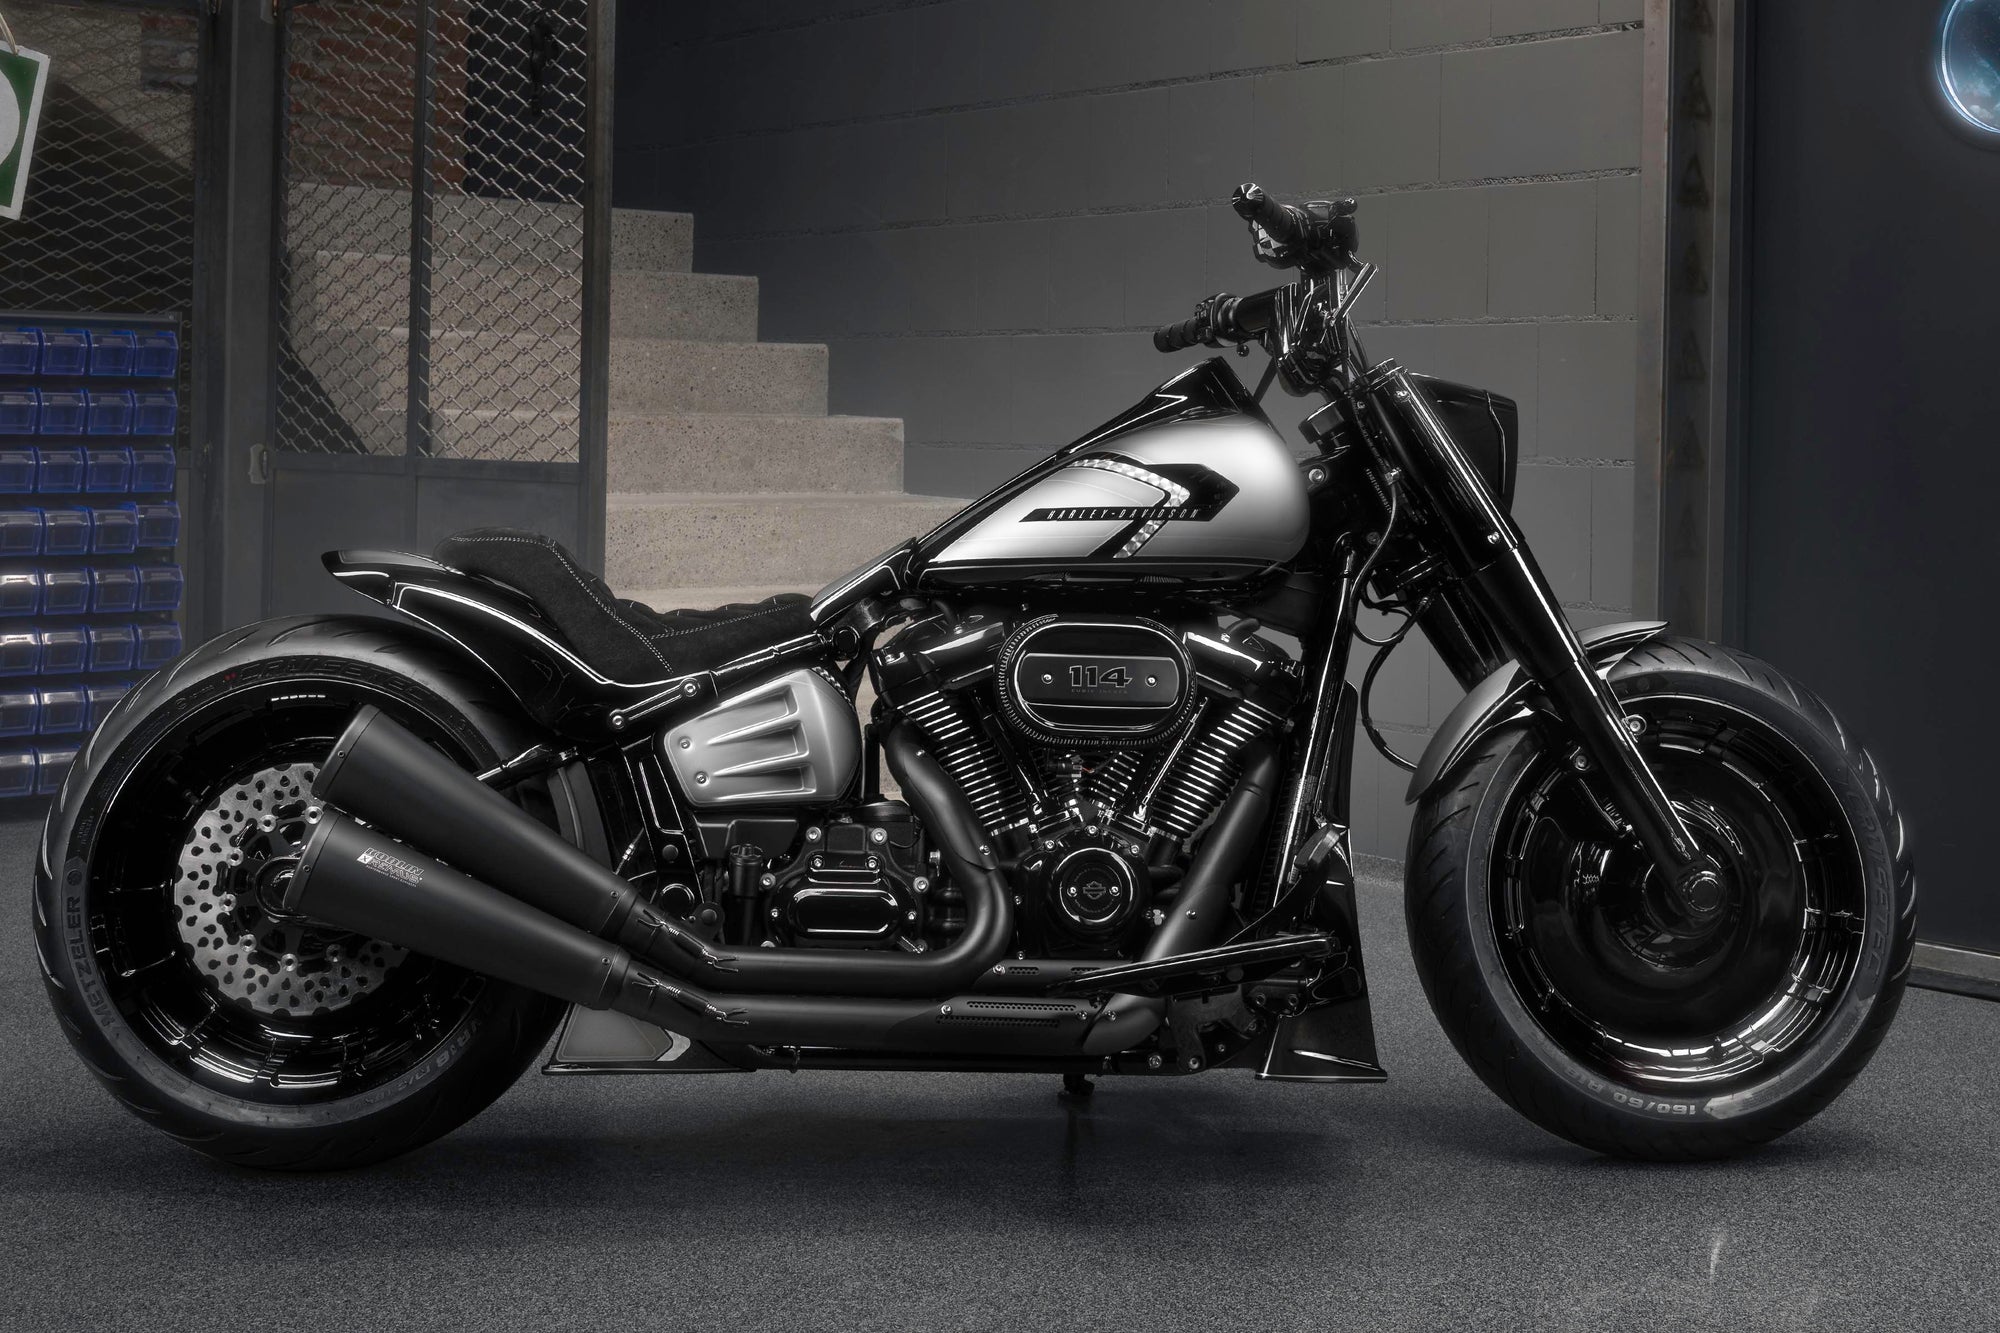 Modified Harley Davidson Softail Fat Boy motorcycle with Killer Custom parts from the side in a modern bike shop